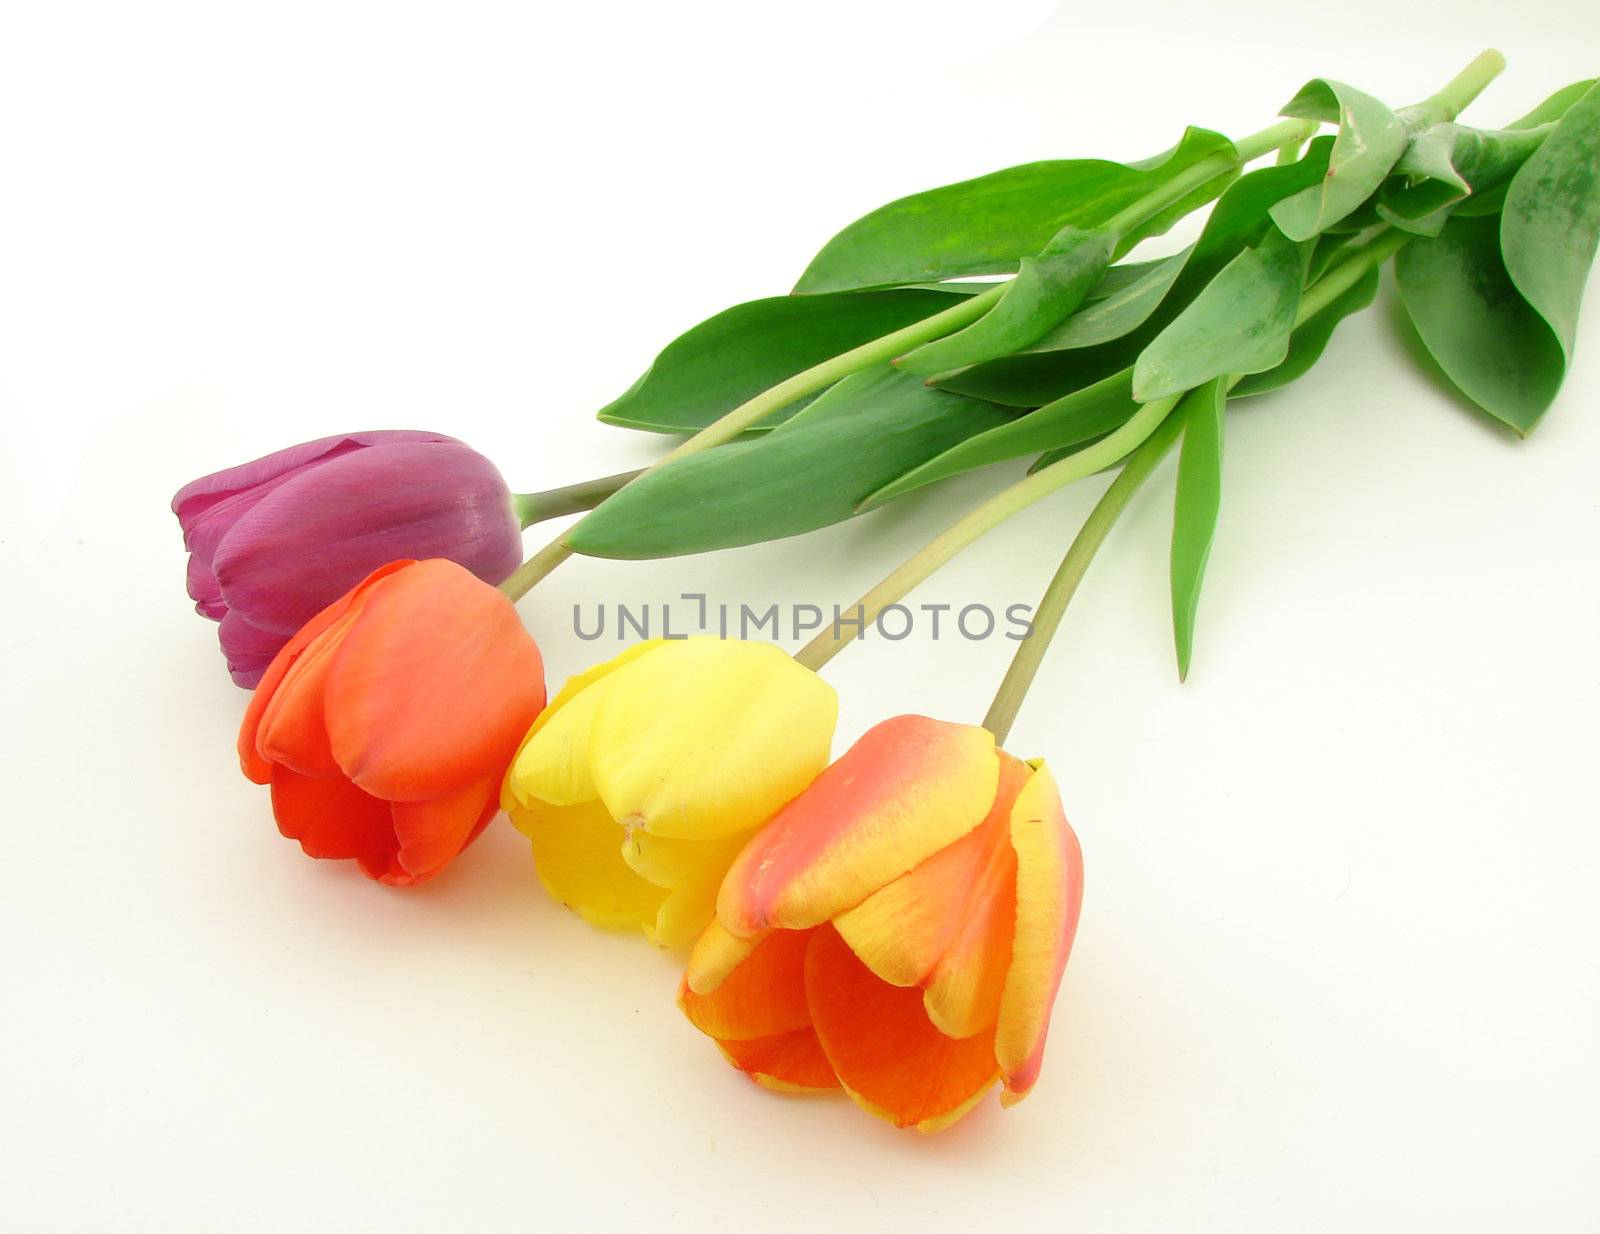 Tulip flowers over white, concept of beauty and bodycare.